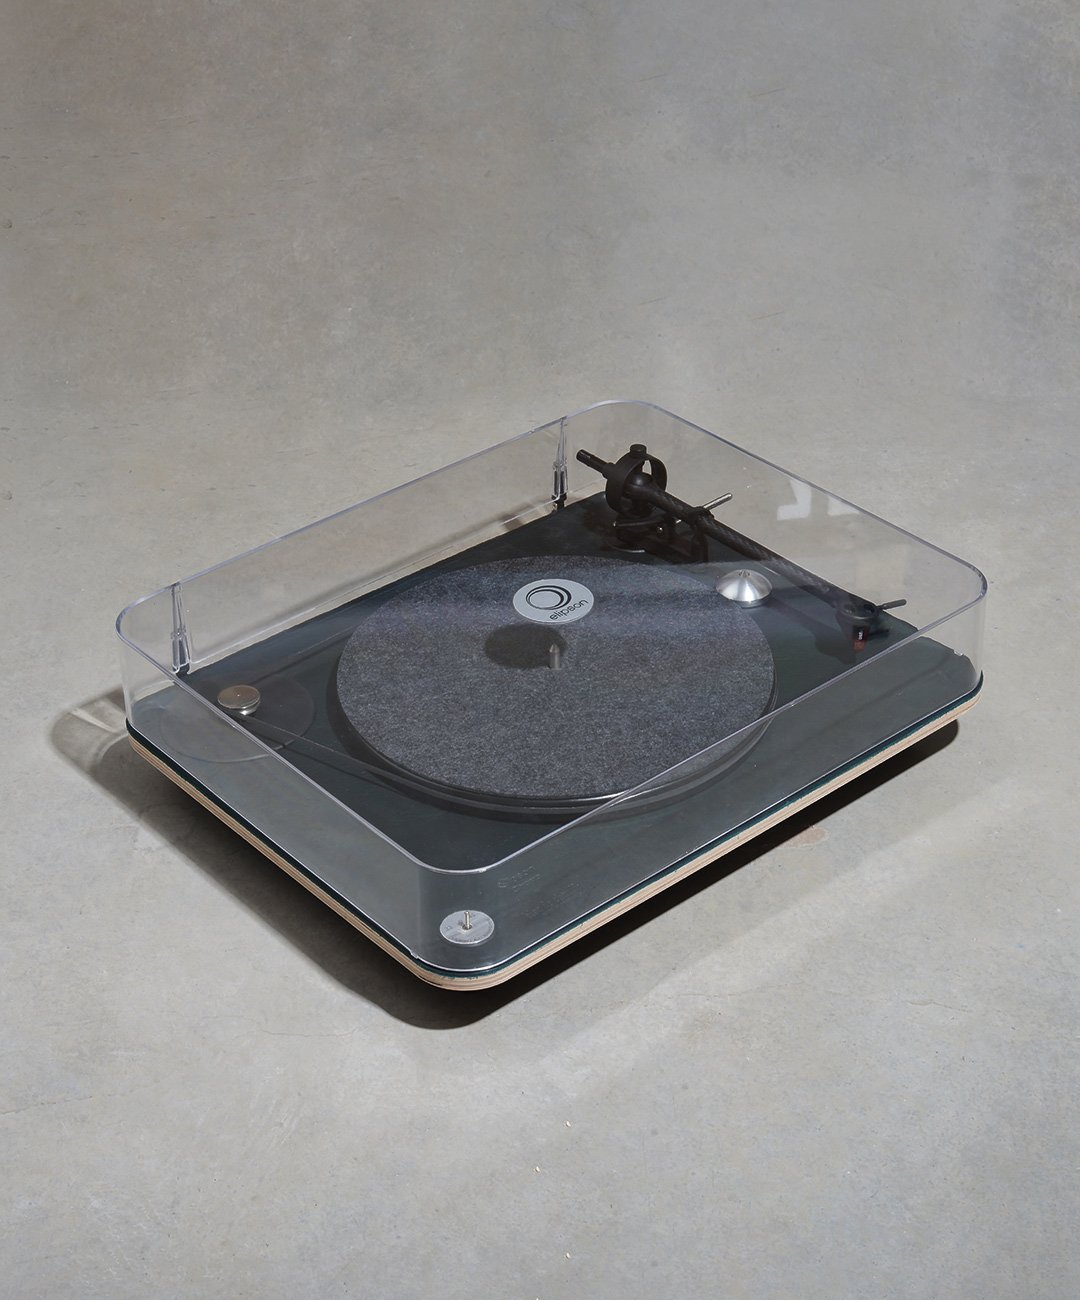 Leather-wrapped turntable